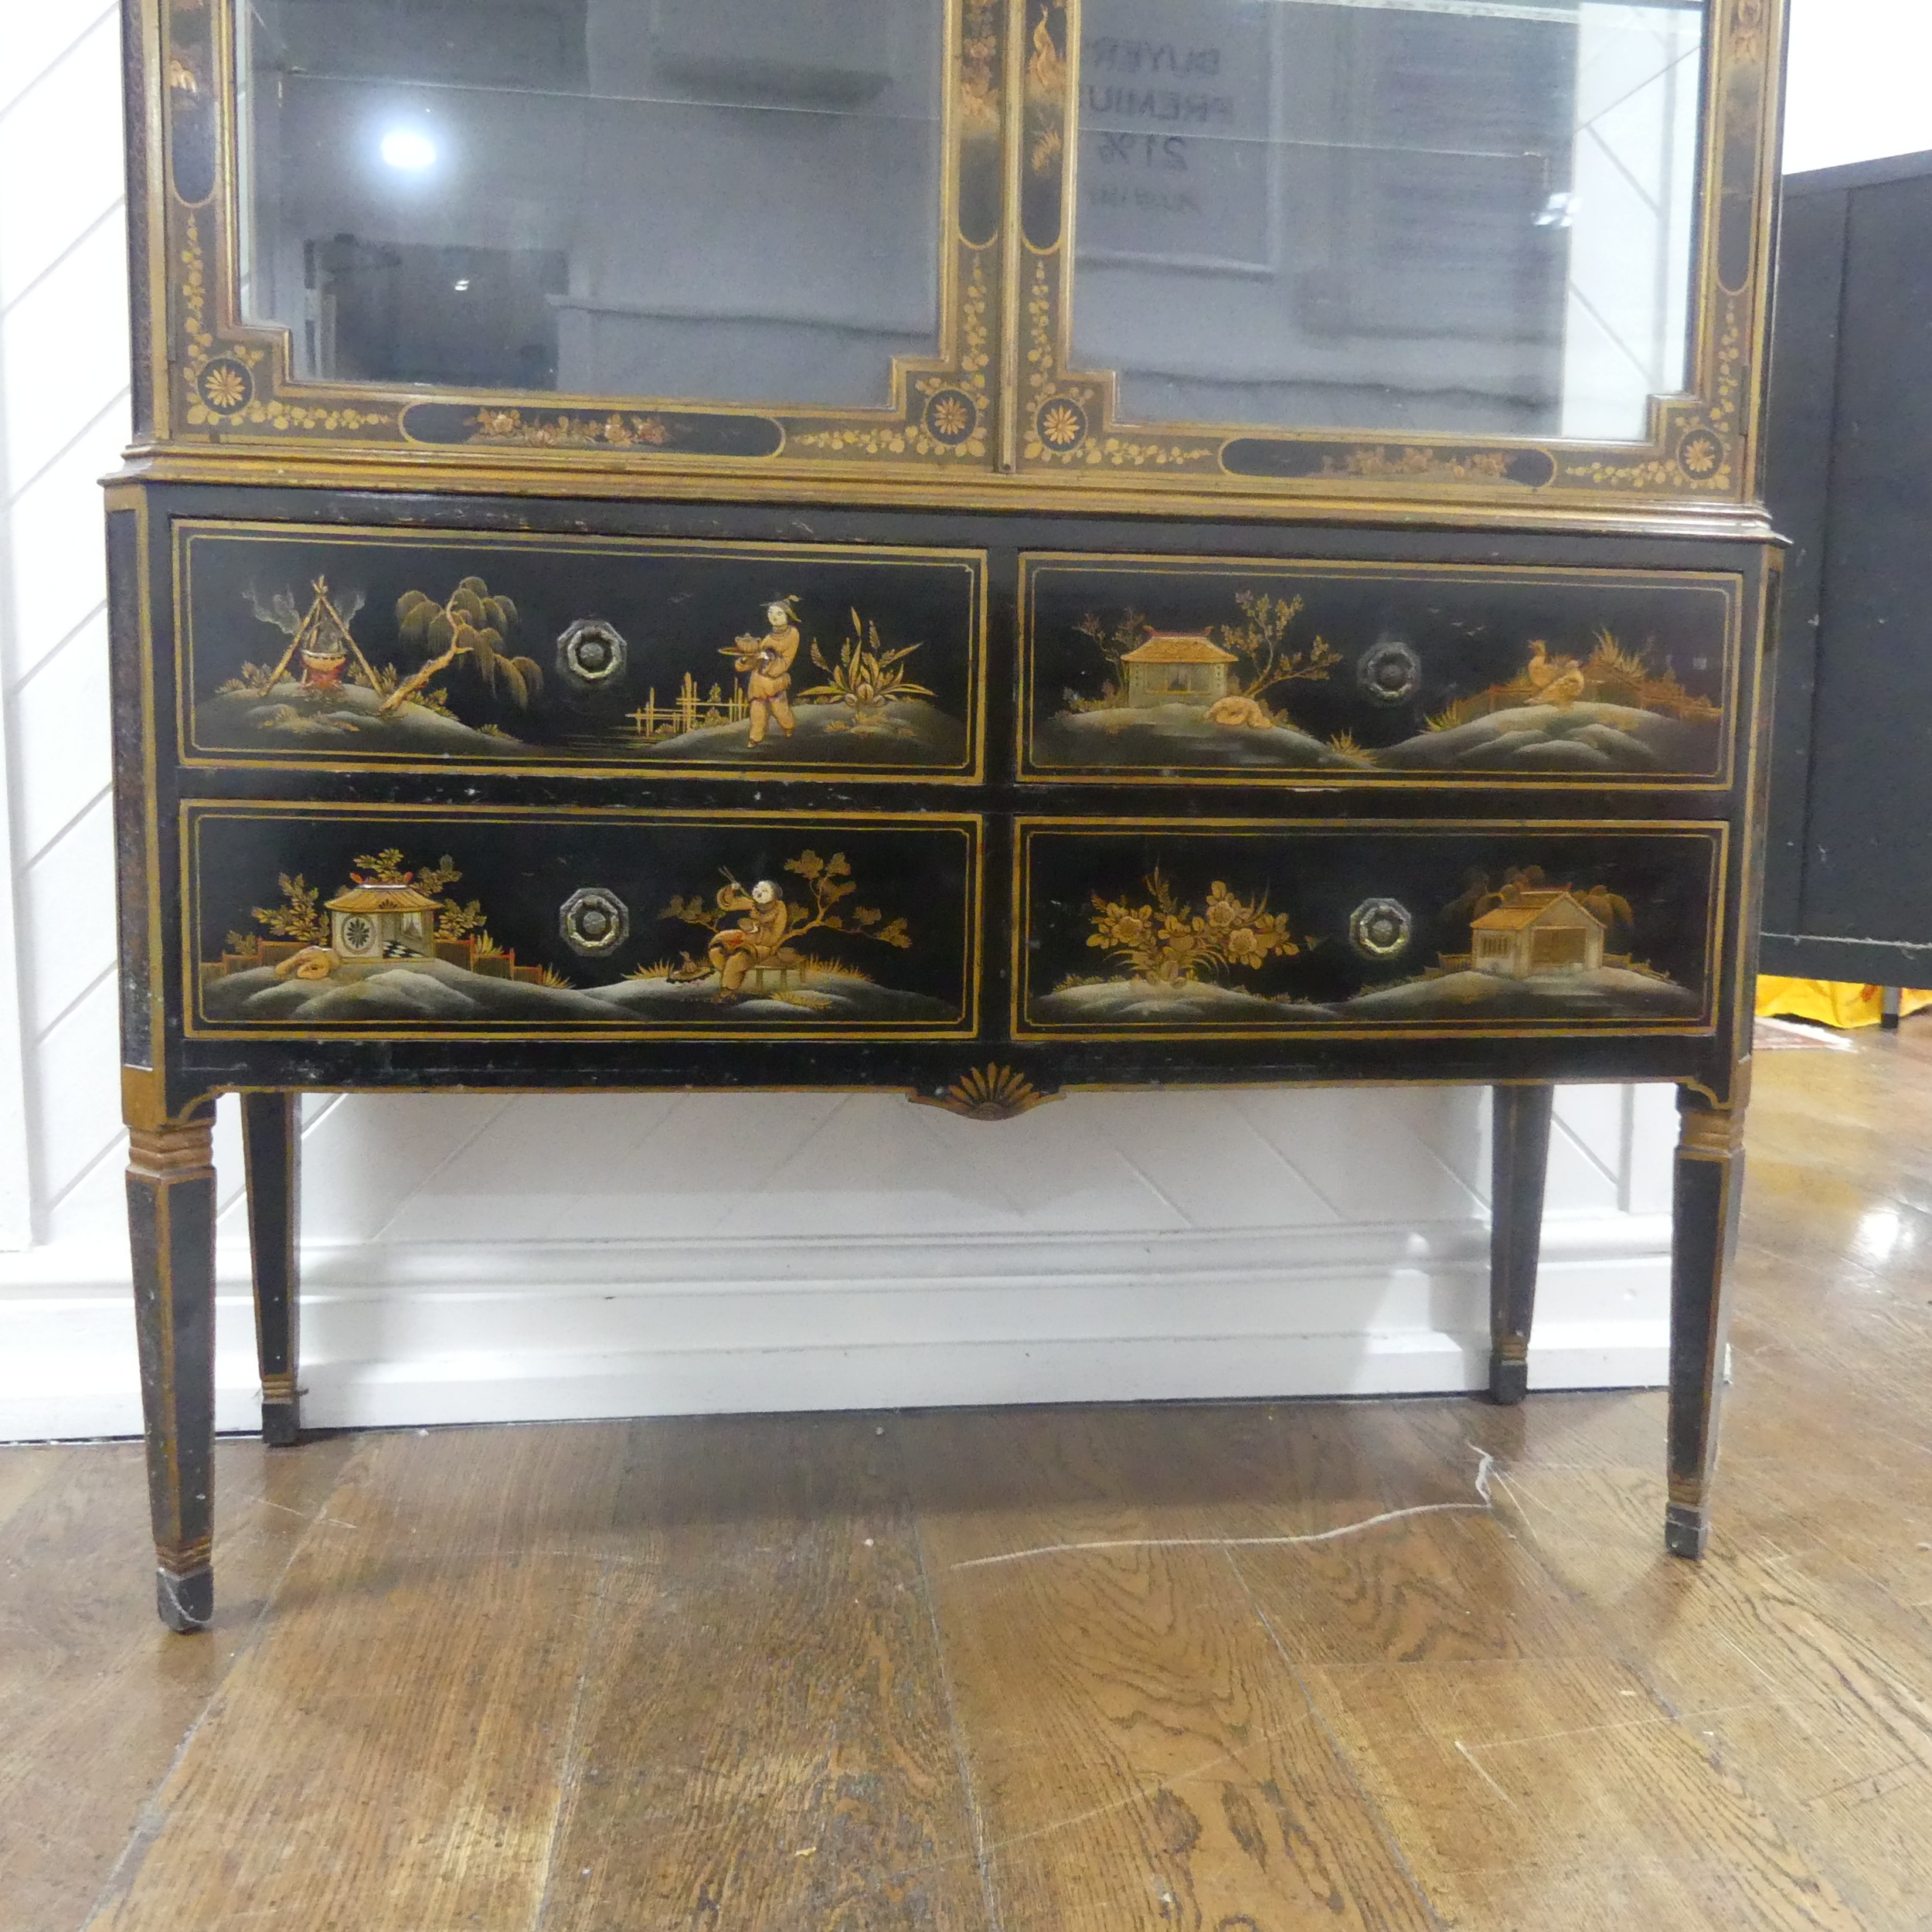 An early 20th century Chinoiserie display Cabinet, black lacquered with gilt painted decorations, - Image 2 of 7